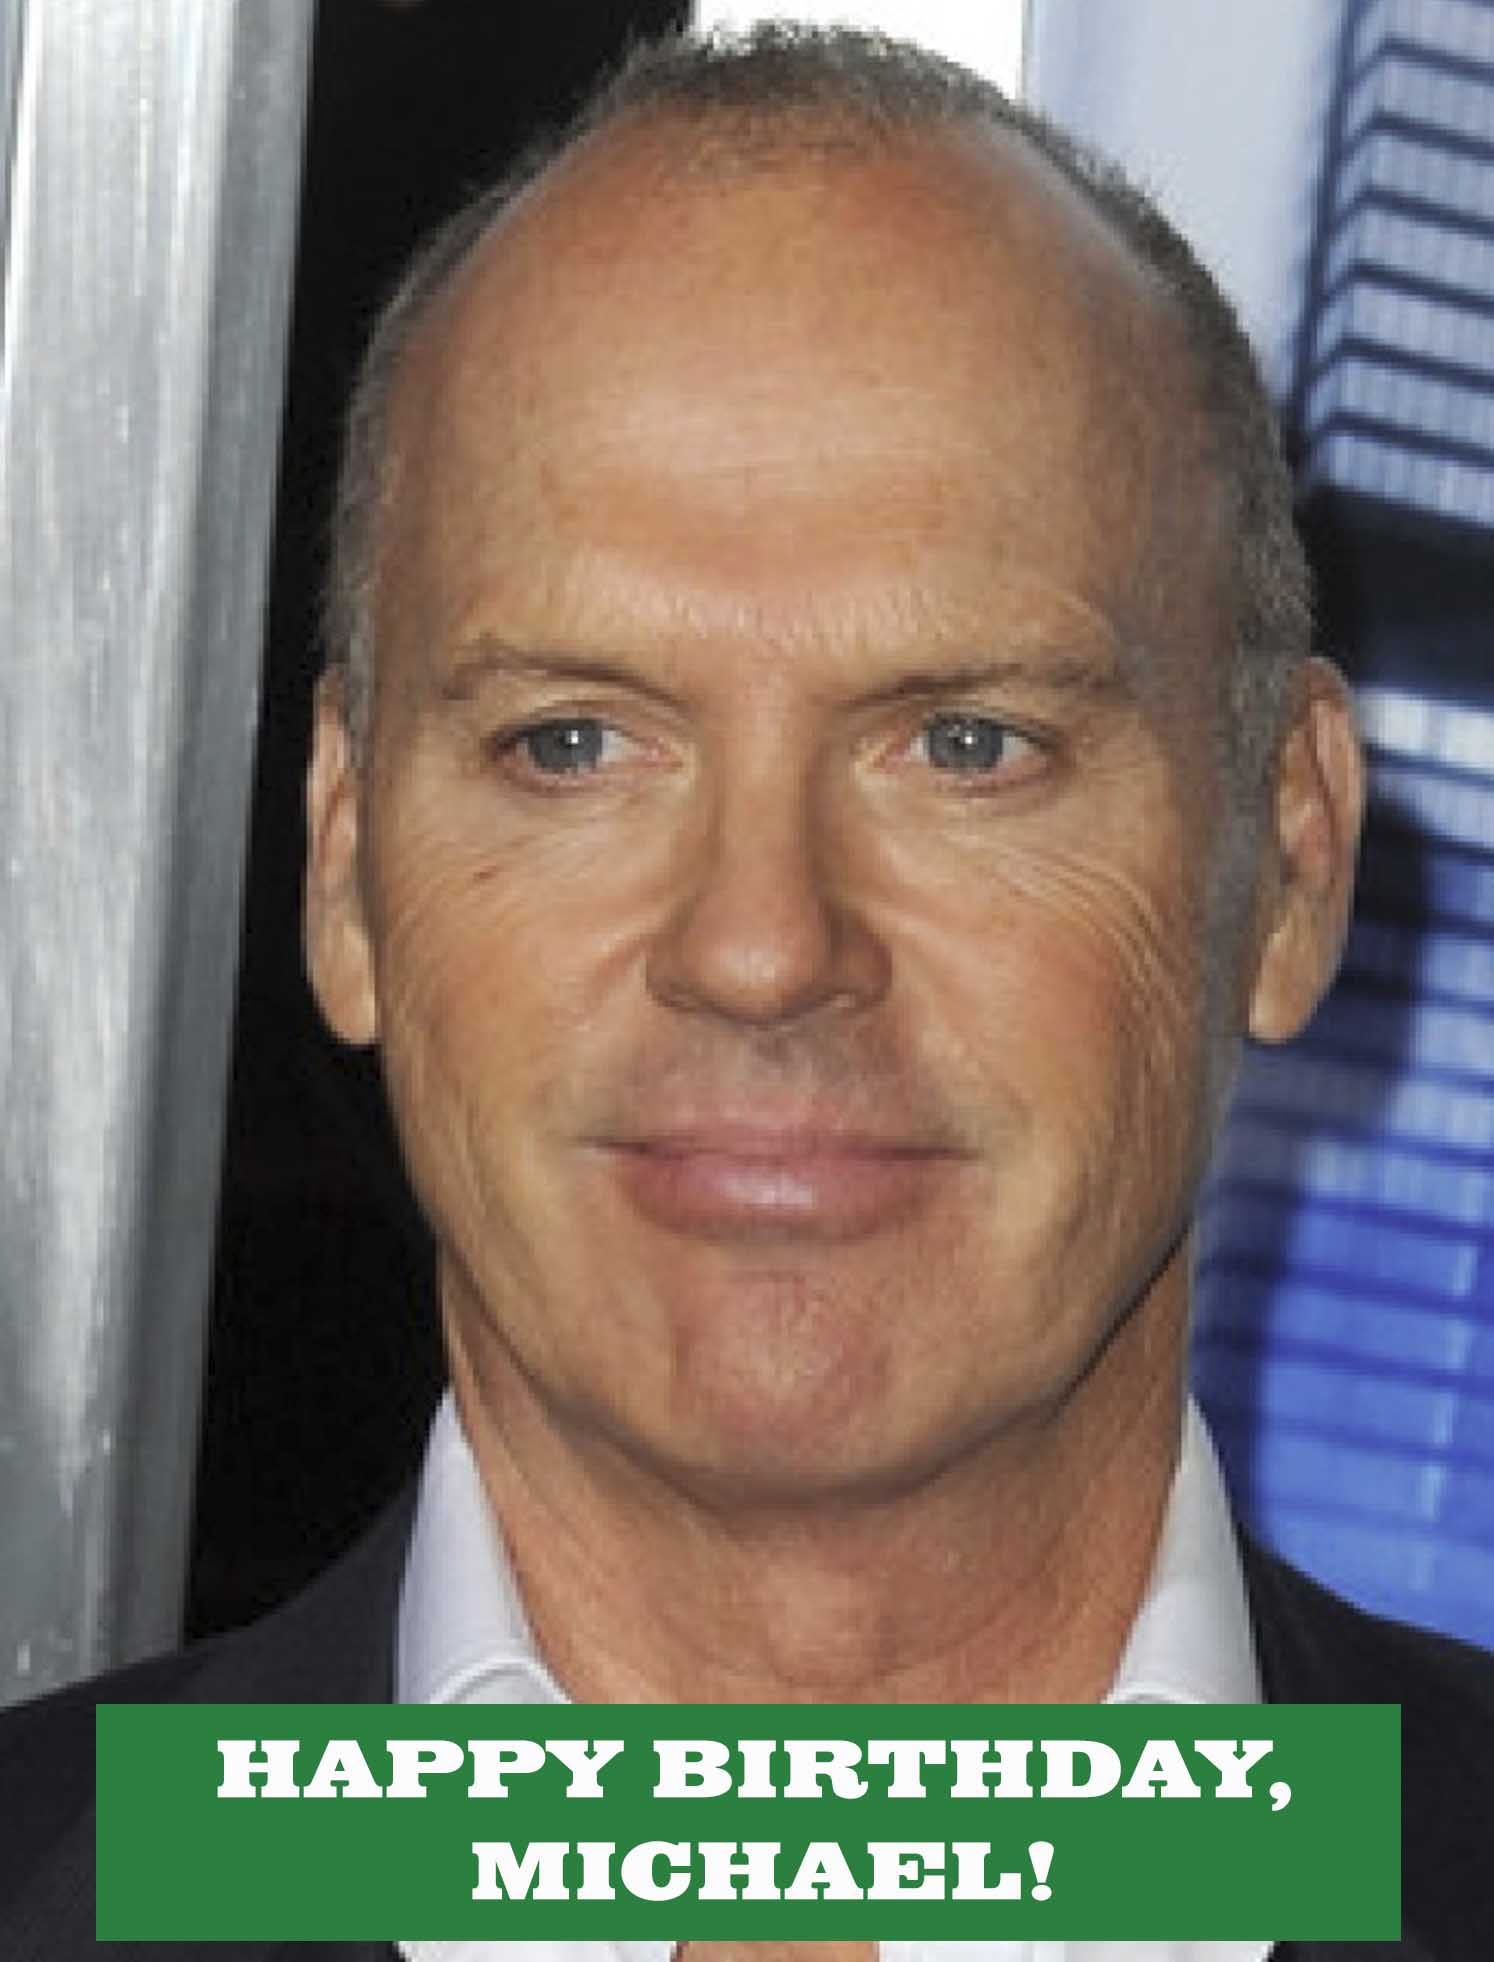 Happy Birthday to Michael Keaton. He\s played some memorable characters in movies like Beetlejuice and Birdman 